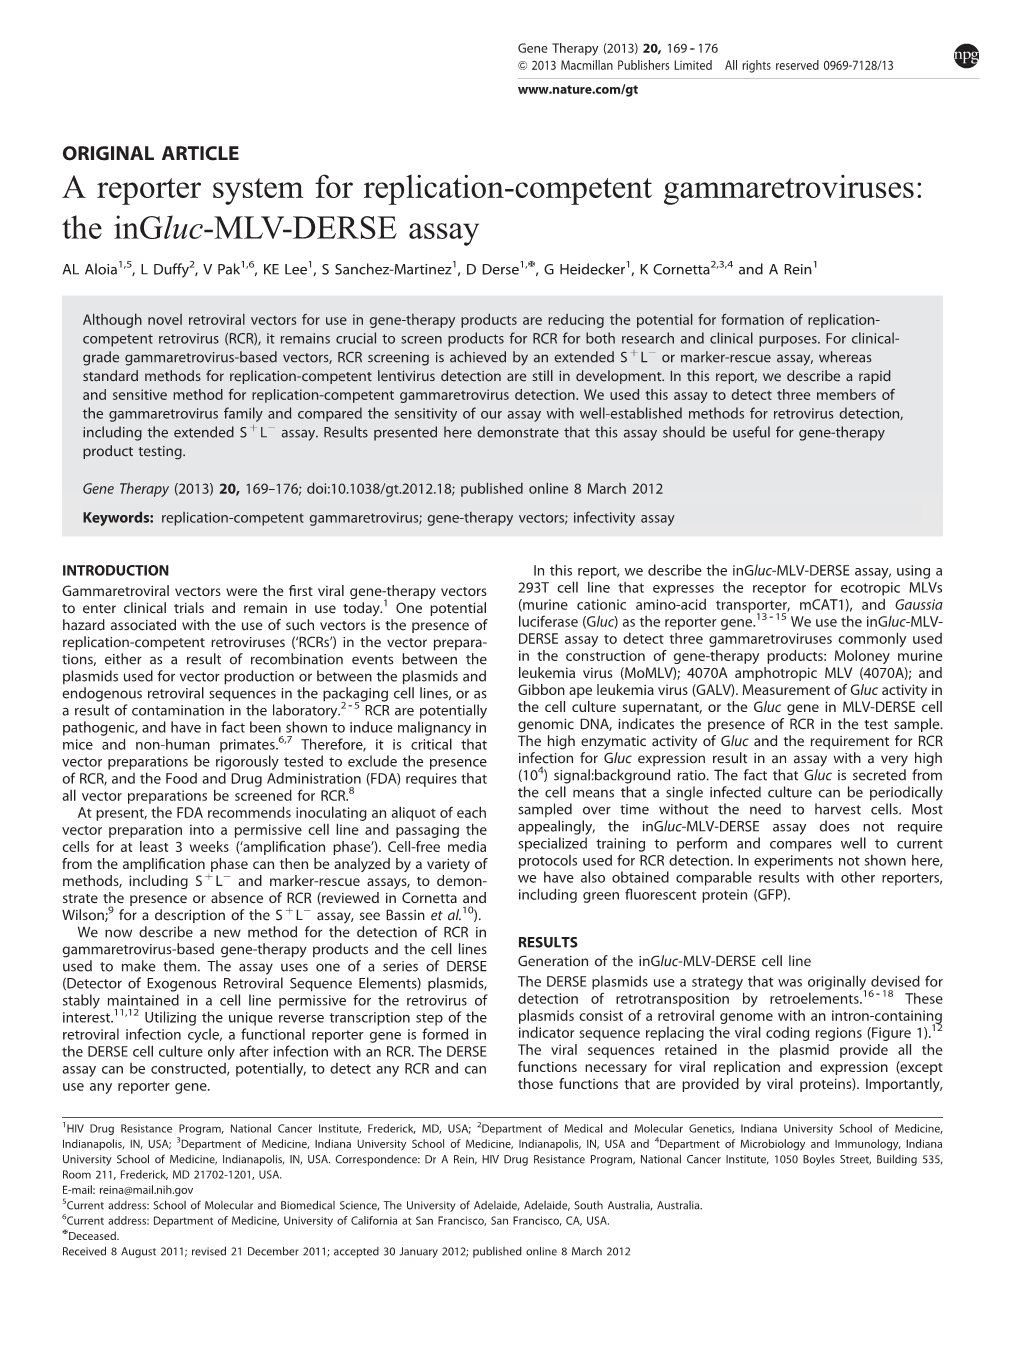 A Reporter System for Replication-Competent Gammaretroviruses: the Ingluc-MLV-DERSE Assay